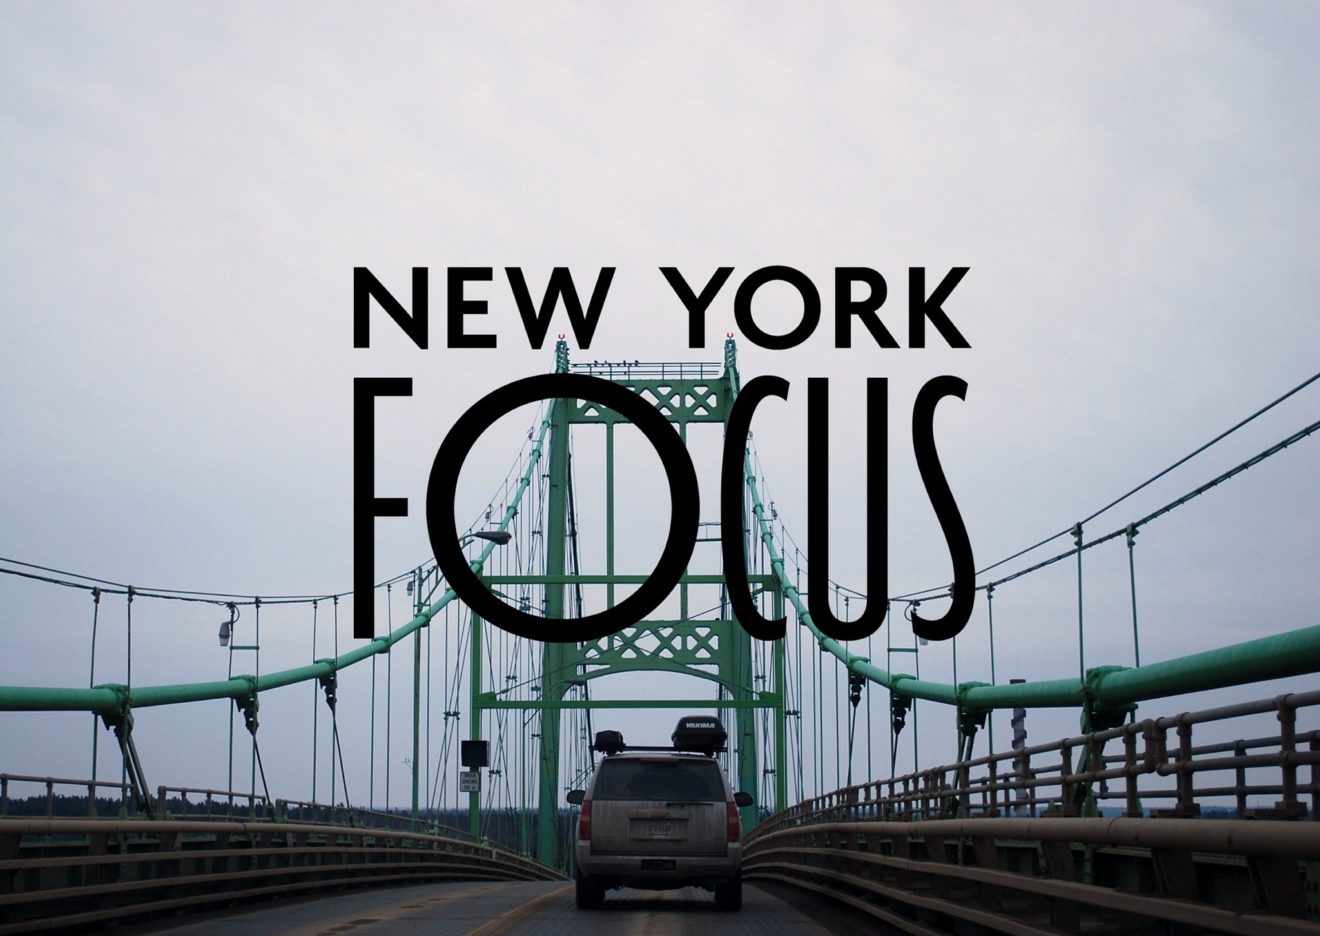 Arrival of NY Focus